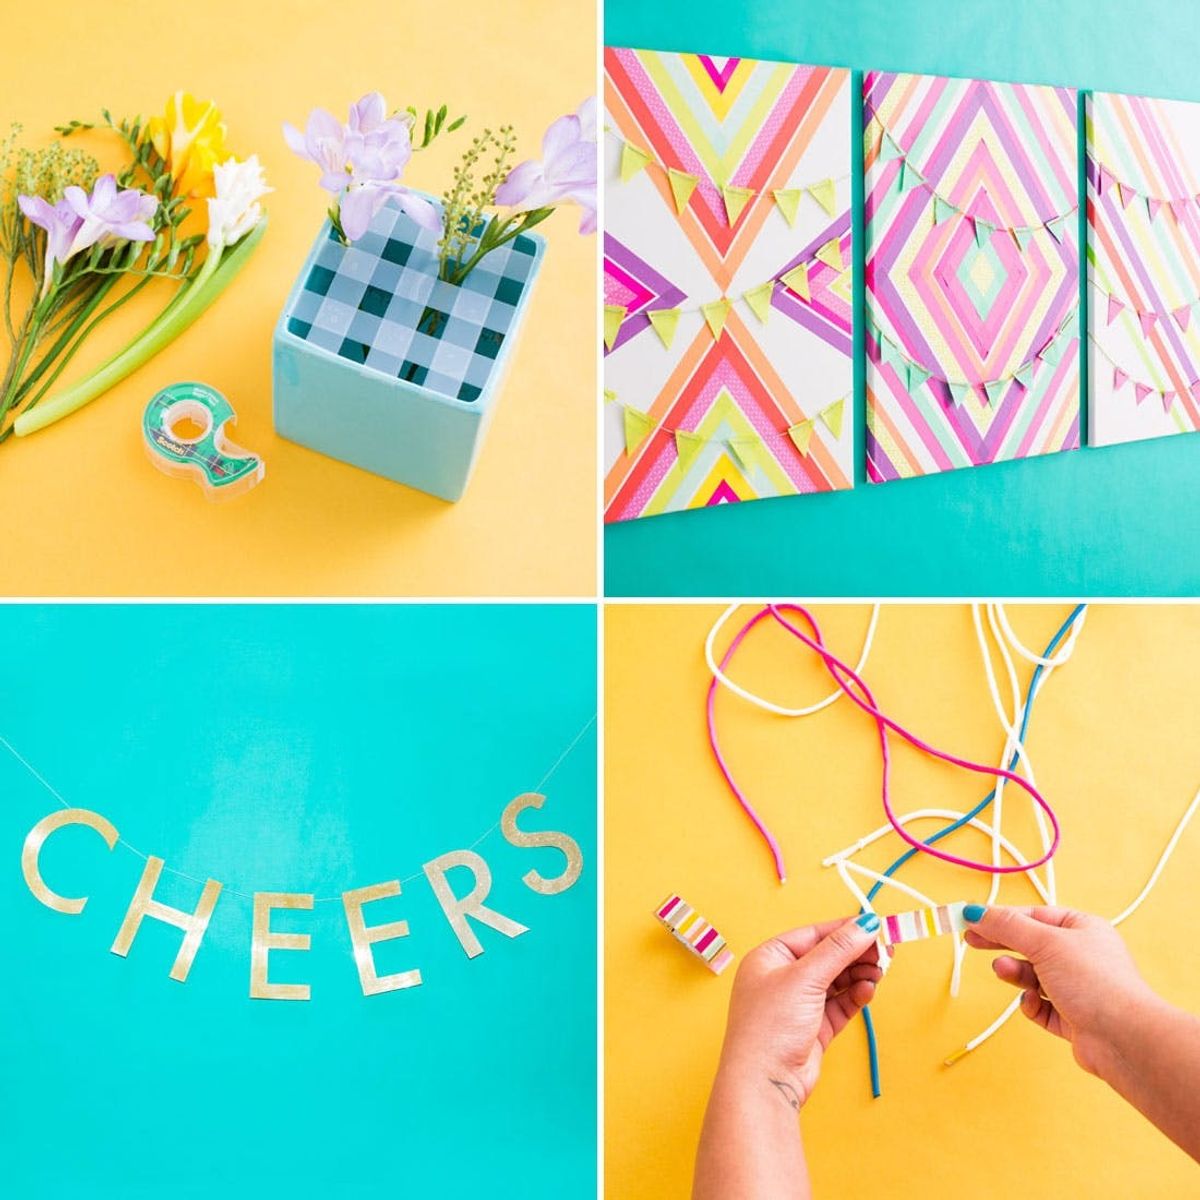 4 Everyday Tape Hacks (+ Win a Copy of Homemakers and DIY Starter Kits!)